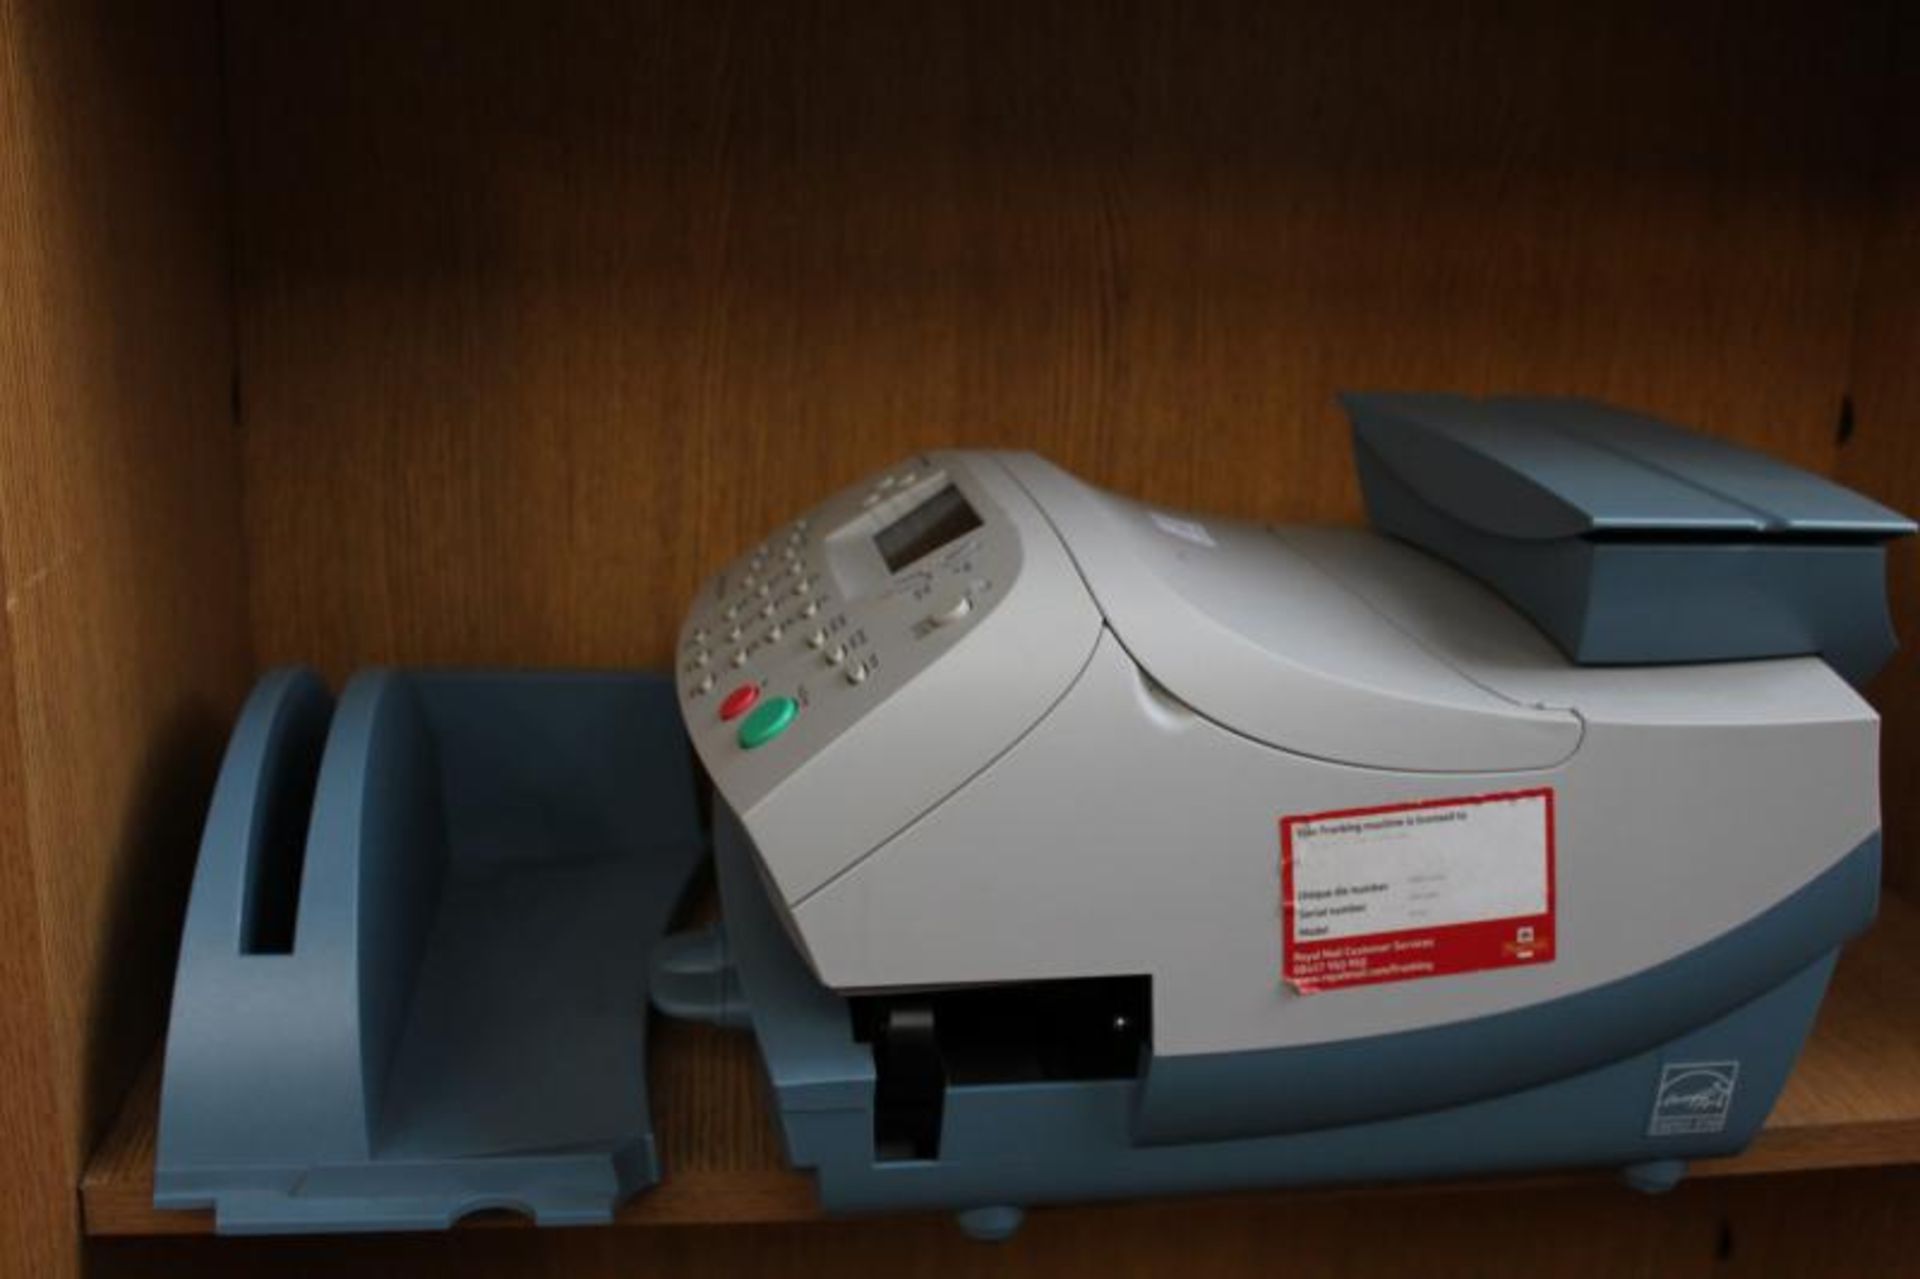 Canon fax machine, Ingenico PDW machine and Pitney Bowes franking machine, a/f - Image 3 of 3